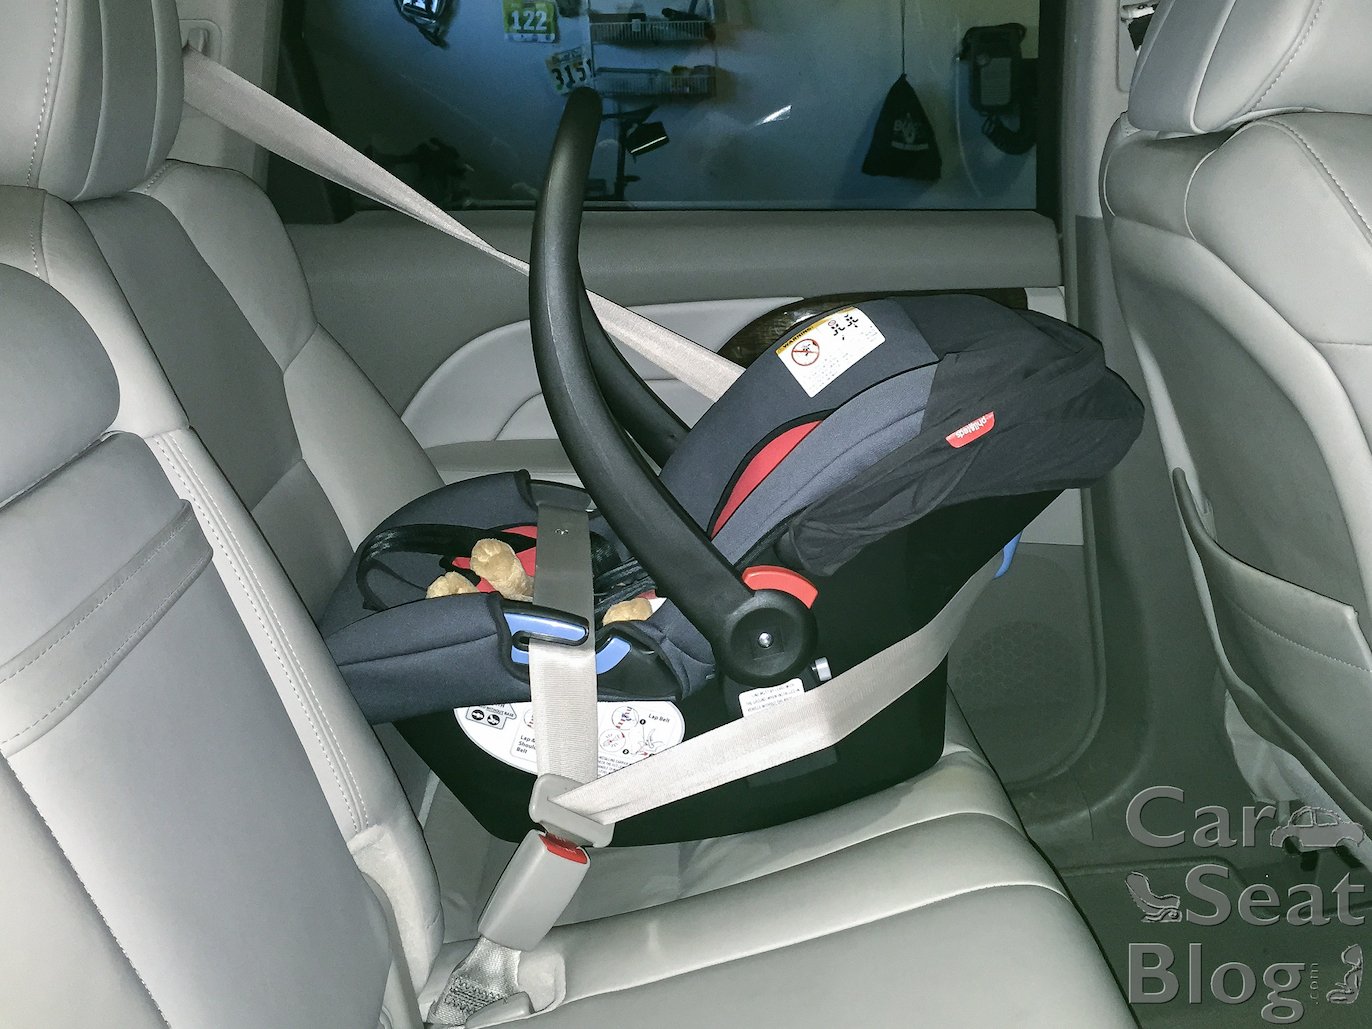 Purchase Install Graco Car Seat Without Base Up To 64 Off - How To Install Graco Rear Facing Car Seat With Seatbelt